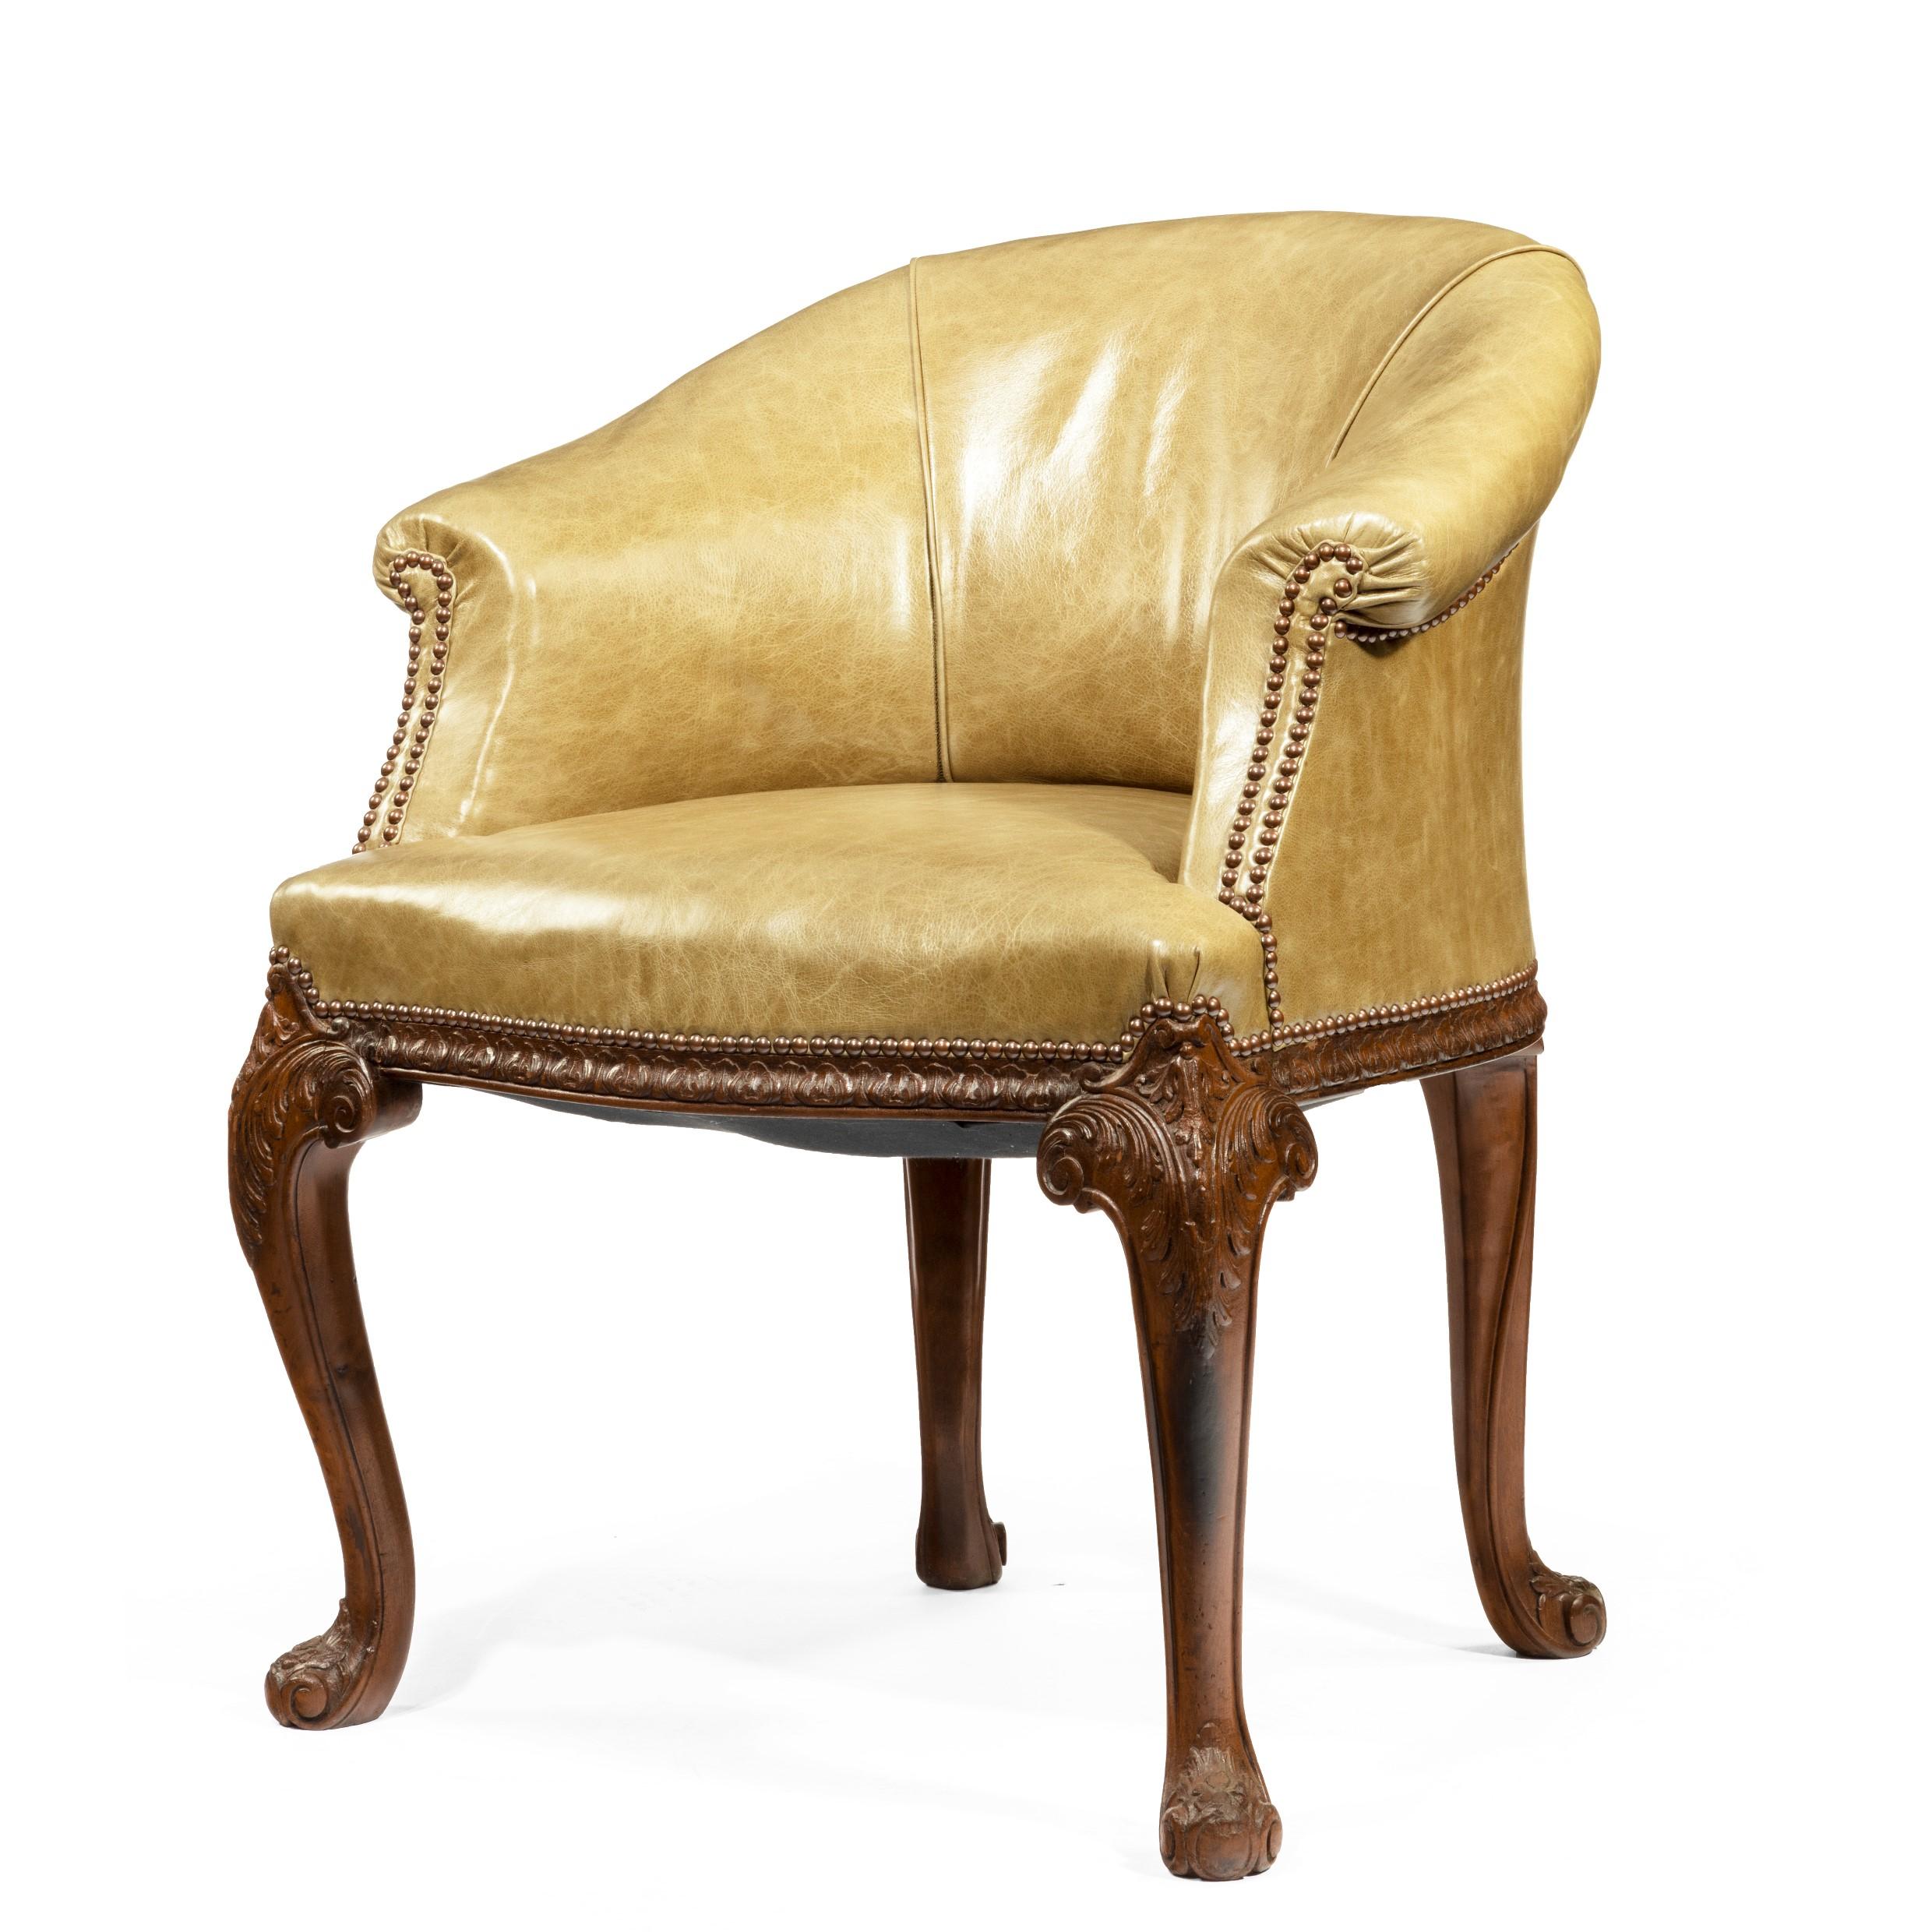 A late Victorian mahogany tub desk chair in the Chippendale style, the fully upholstered shaped back curving down to scrolling arms, with acanthus leaves carved along the seat rail and on the cabriole front legs, English, circa 1900.